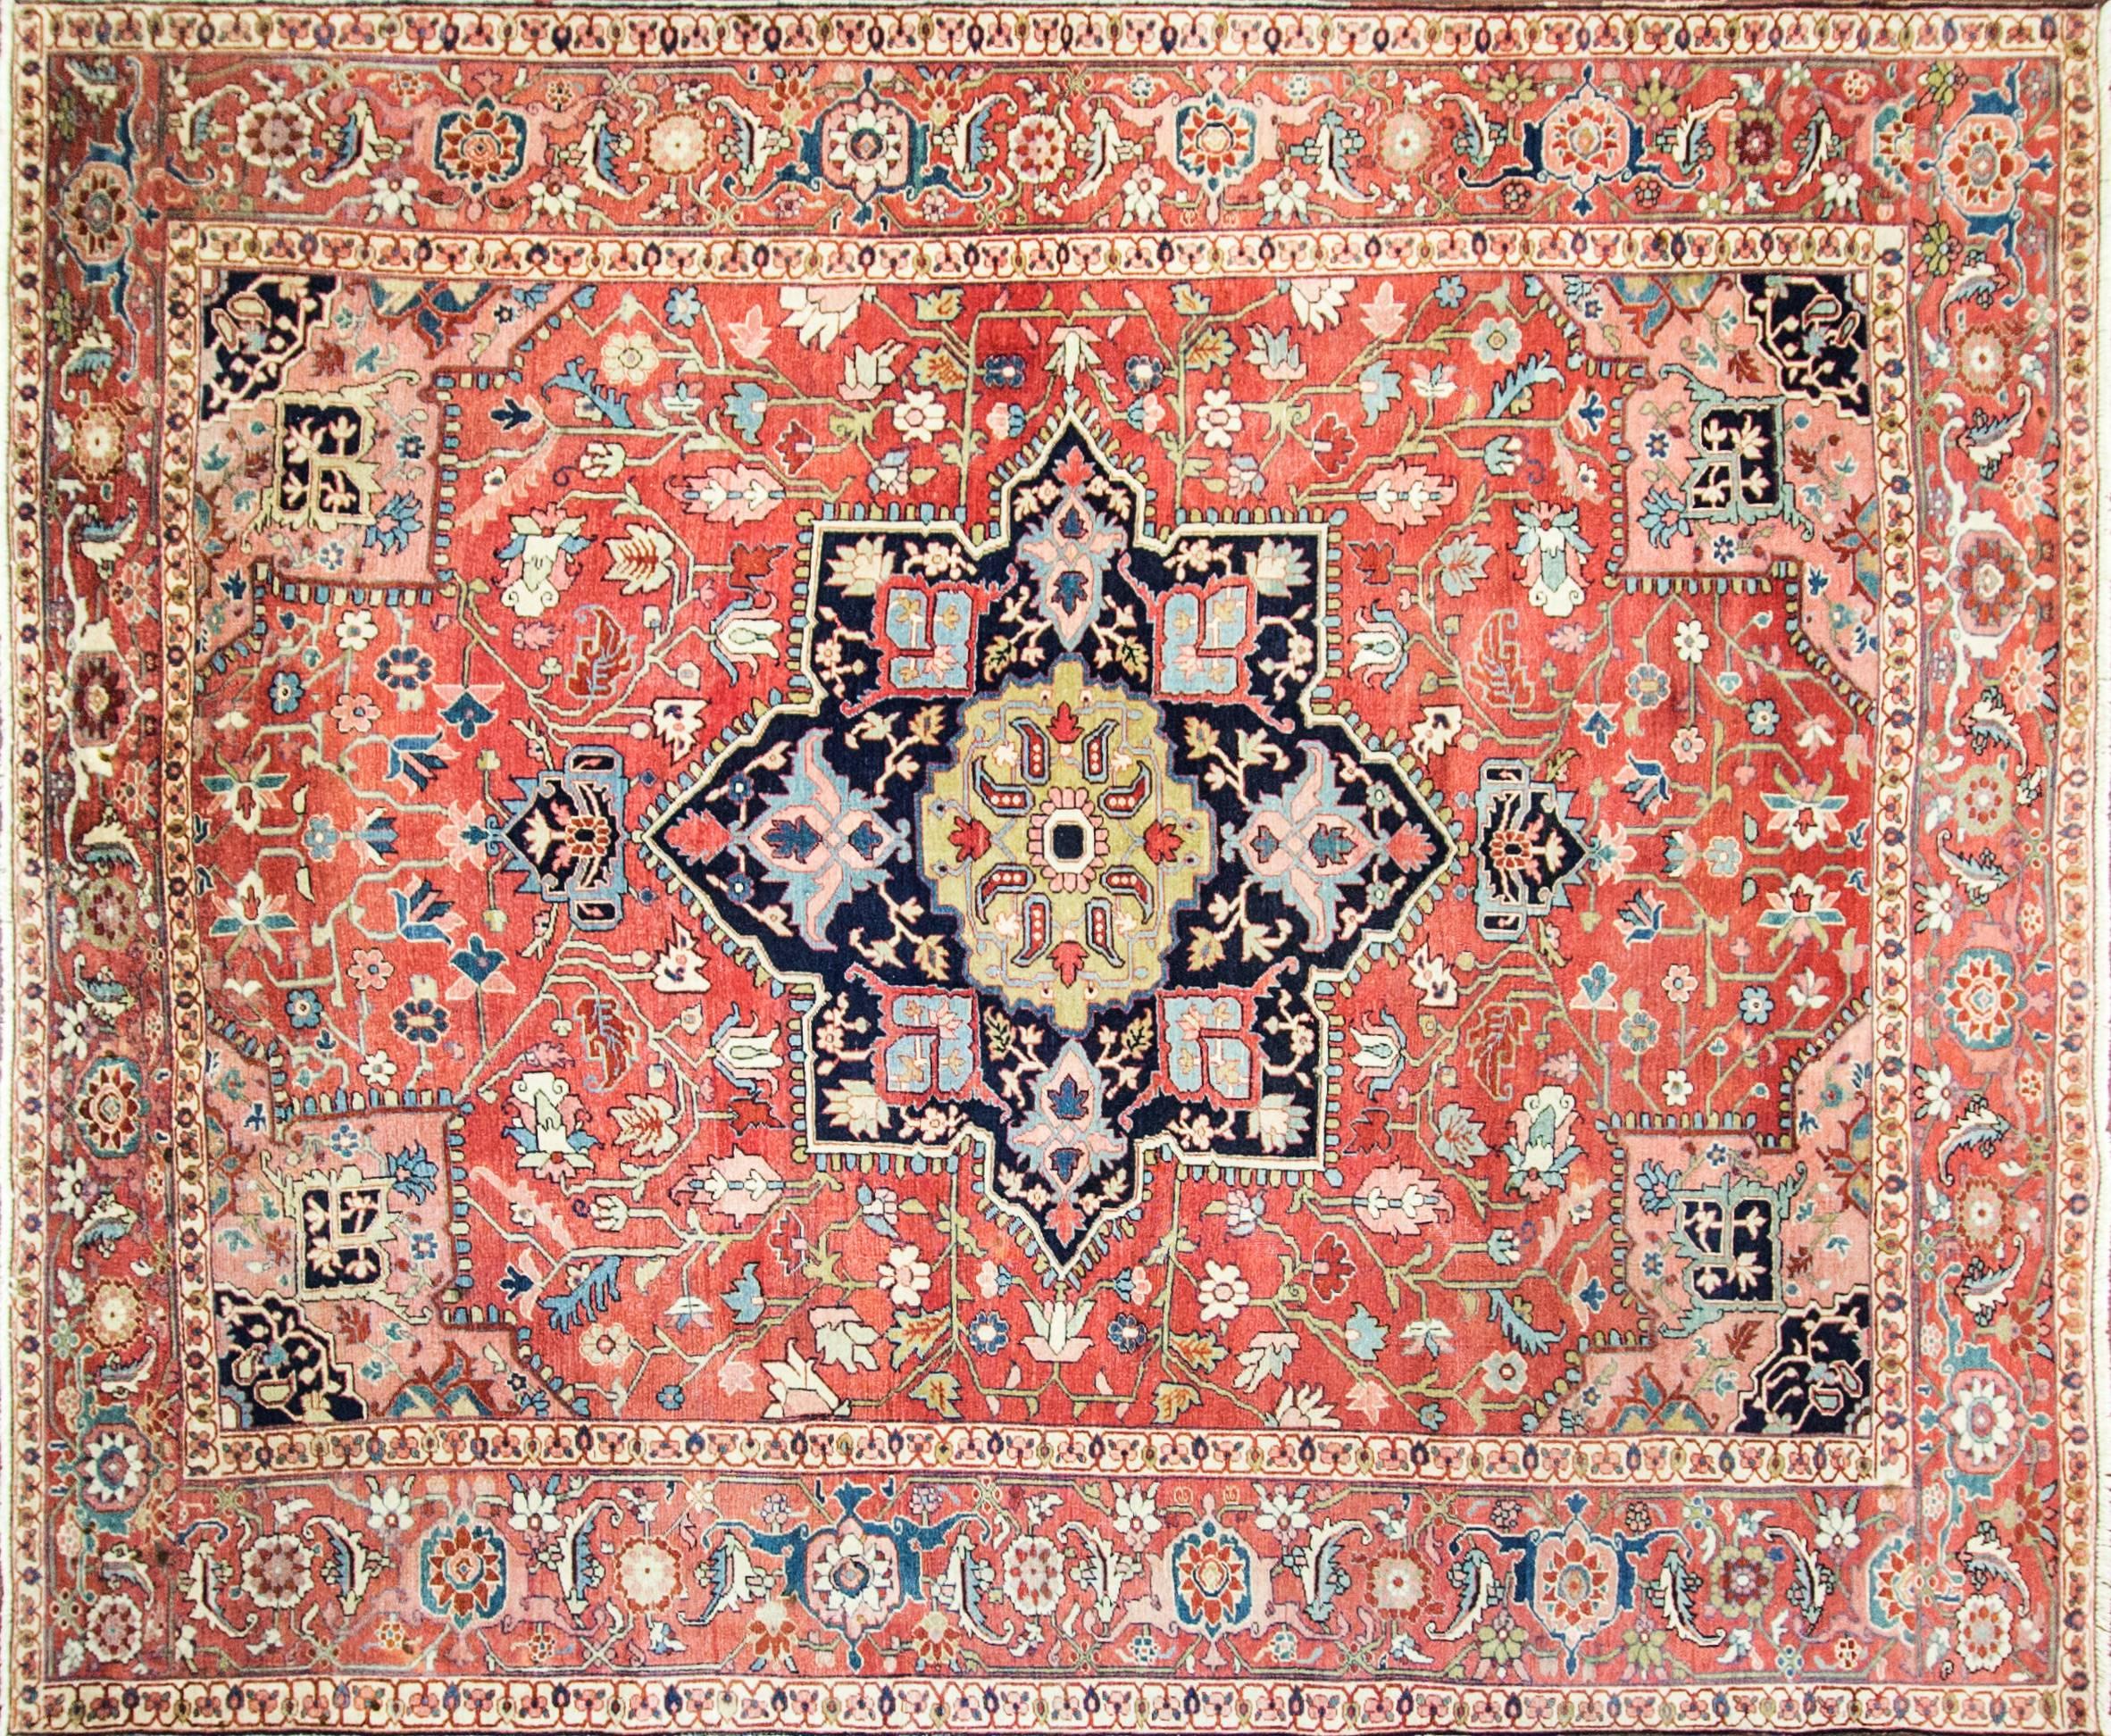 Fine 19th century antique Serapi carpet of Persia. Woven in the rugged mountains of Northwest Persia, Serapi rugs are a distinct Heriz region style, with finer knotting and more large-scale spaciously placed antique carpet designs than other rugs